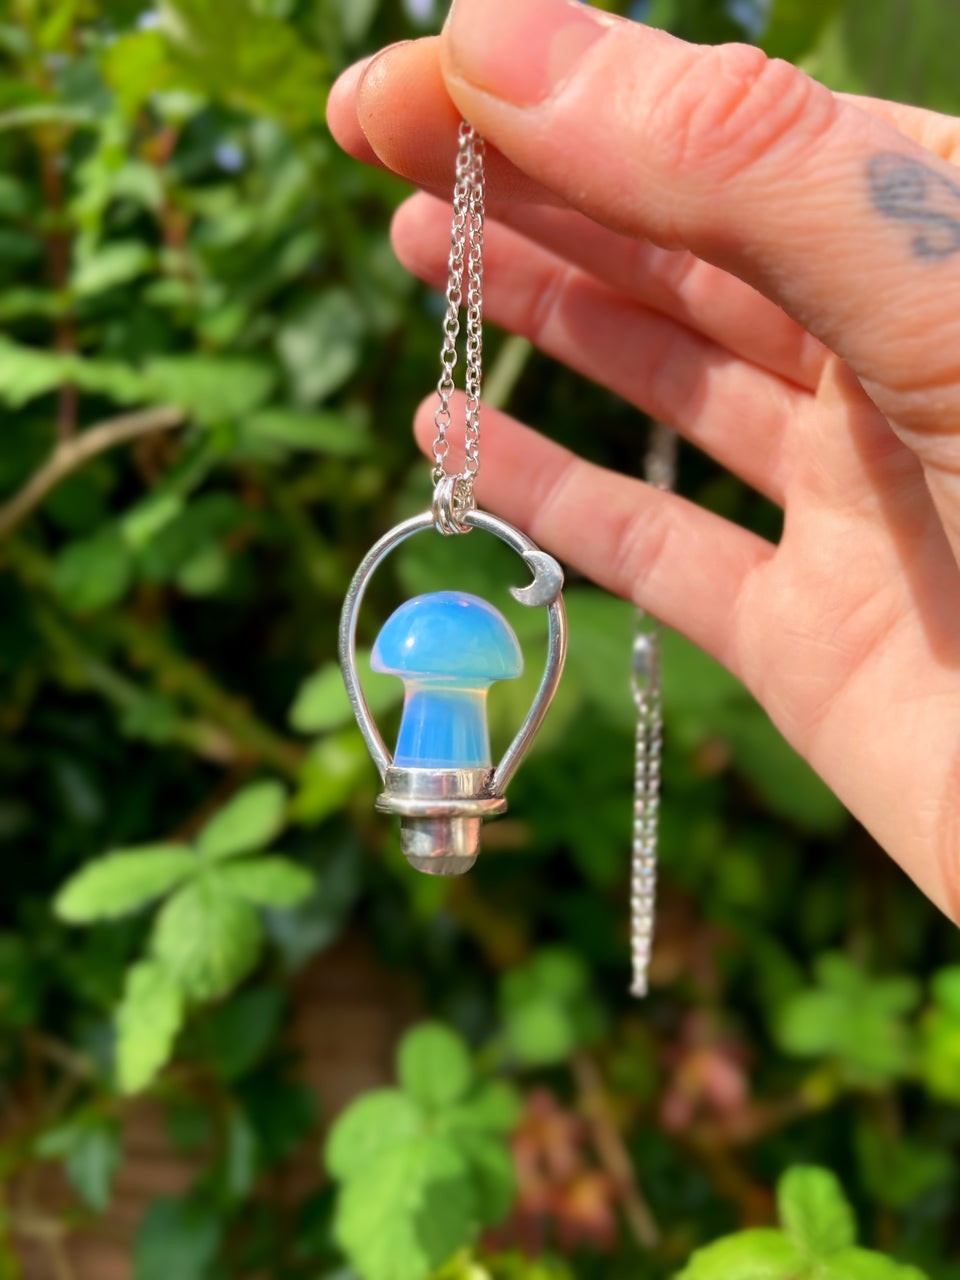 ꩜WATER WITCH꩜ Handmade Sterling Silver Necklace with Opalite Mushroom & Rainbow Moonstone